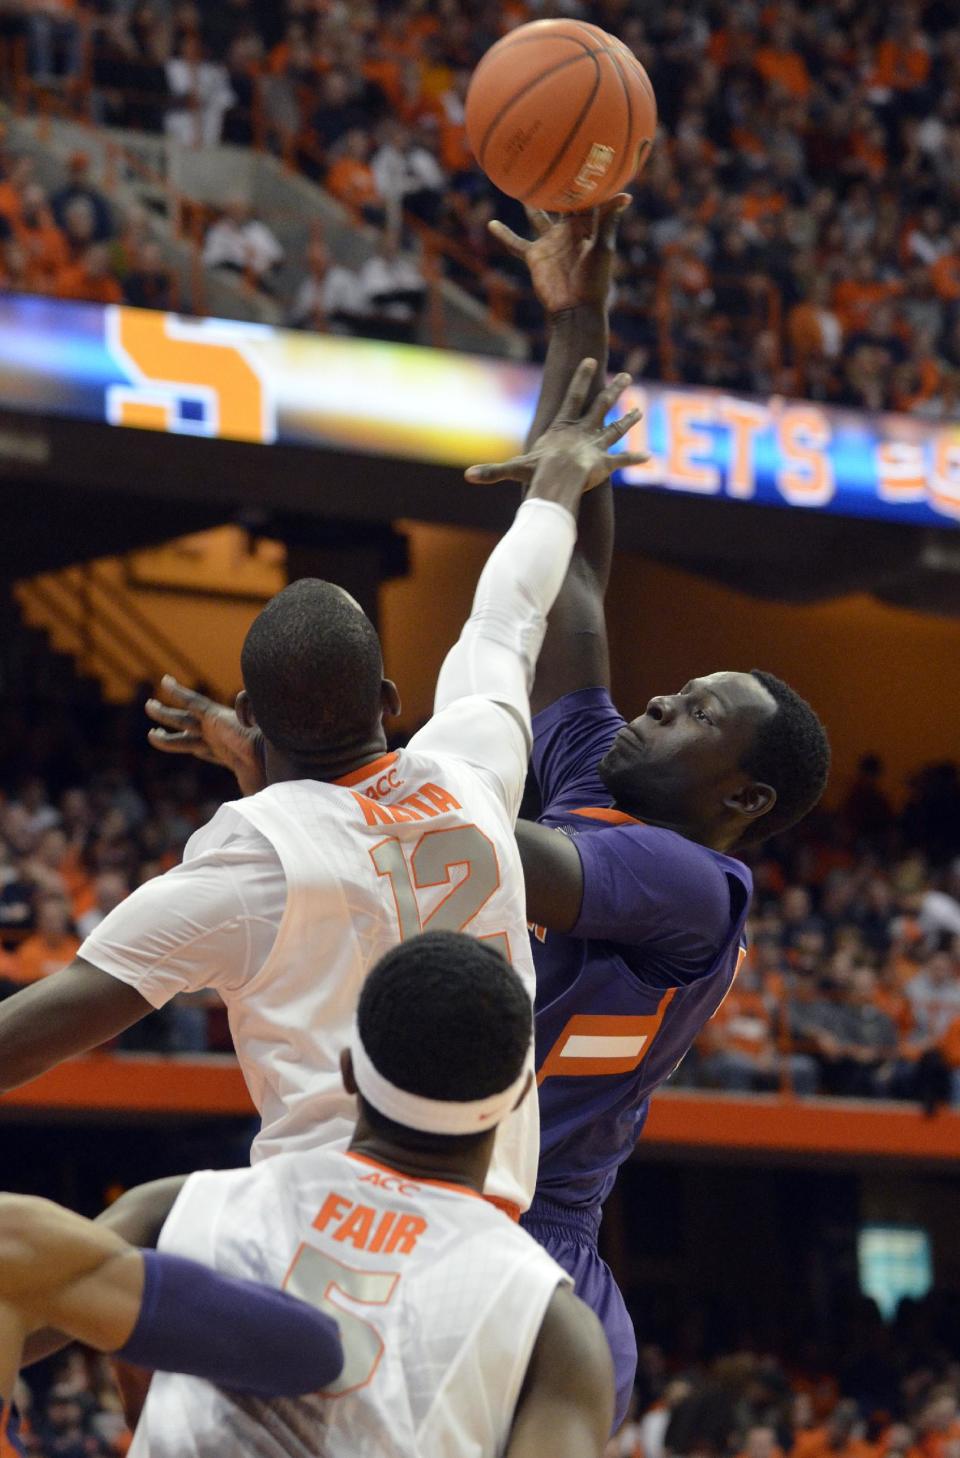 Clemson's Sidy Djitte shoots over Syracuse's Baye Moussa Keita during the first half of an NCAA college basketball game in Syracuse, N.Y., Sunday, Feb. 9, 2014. (AP Photo/Kevin Rivoli)